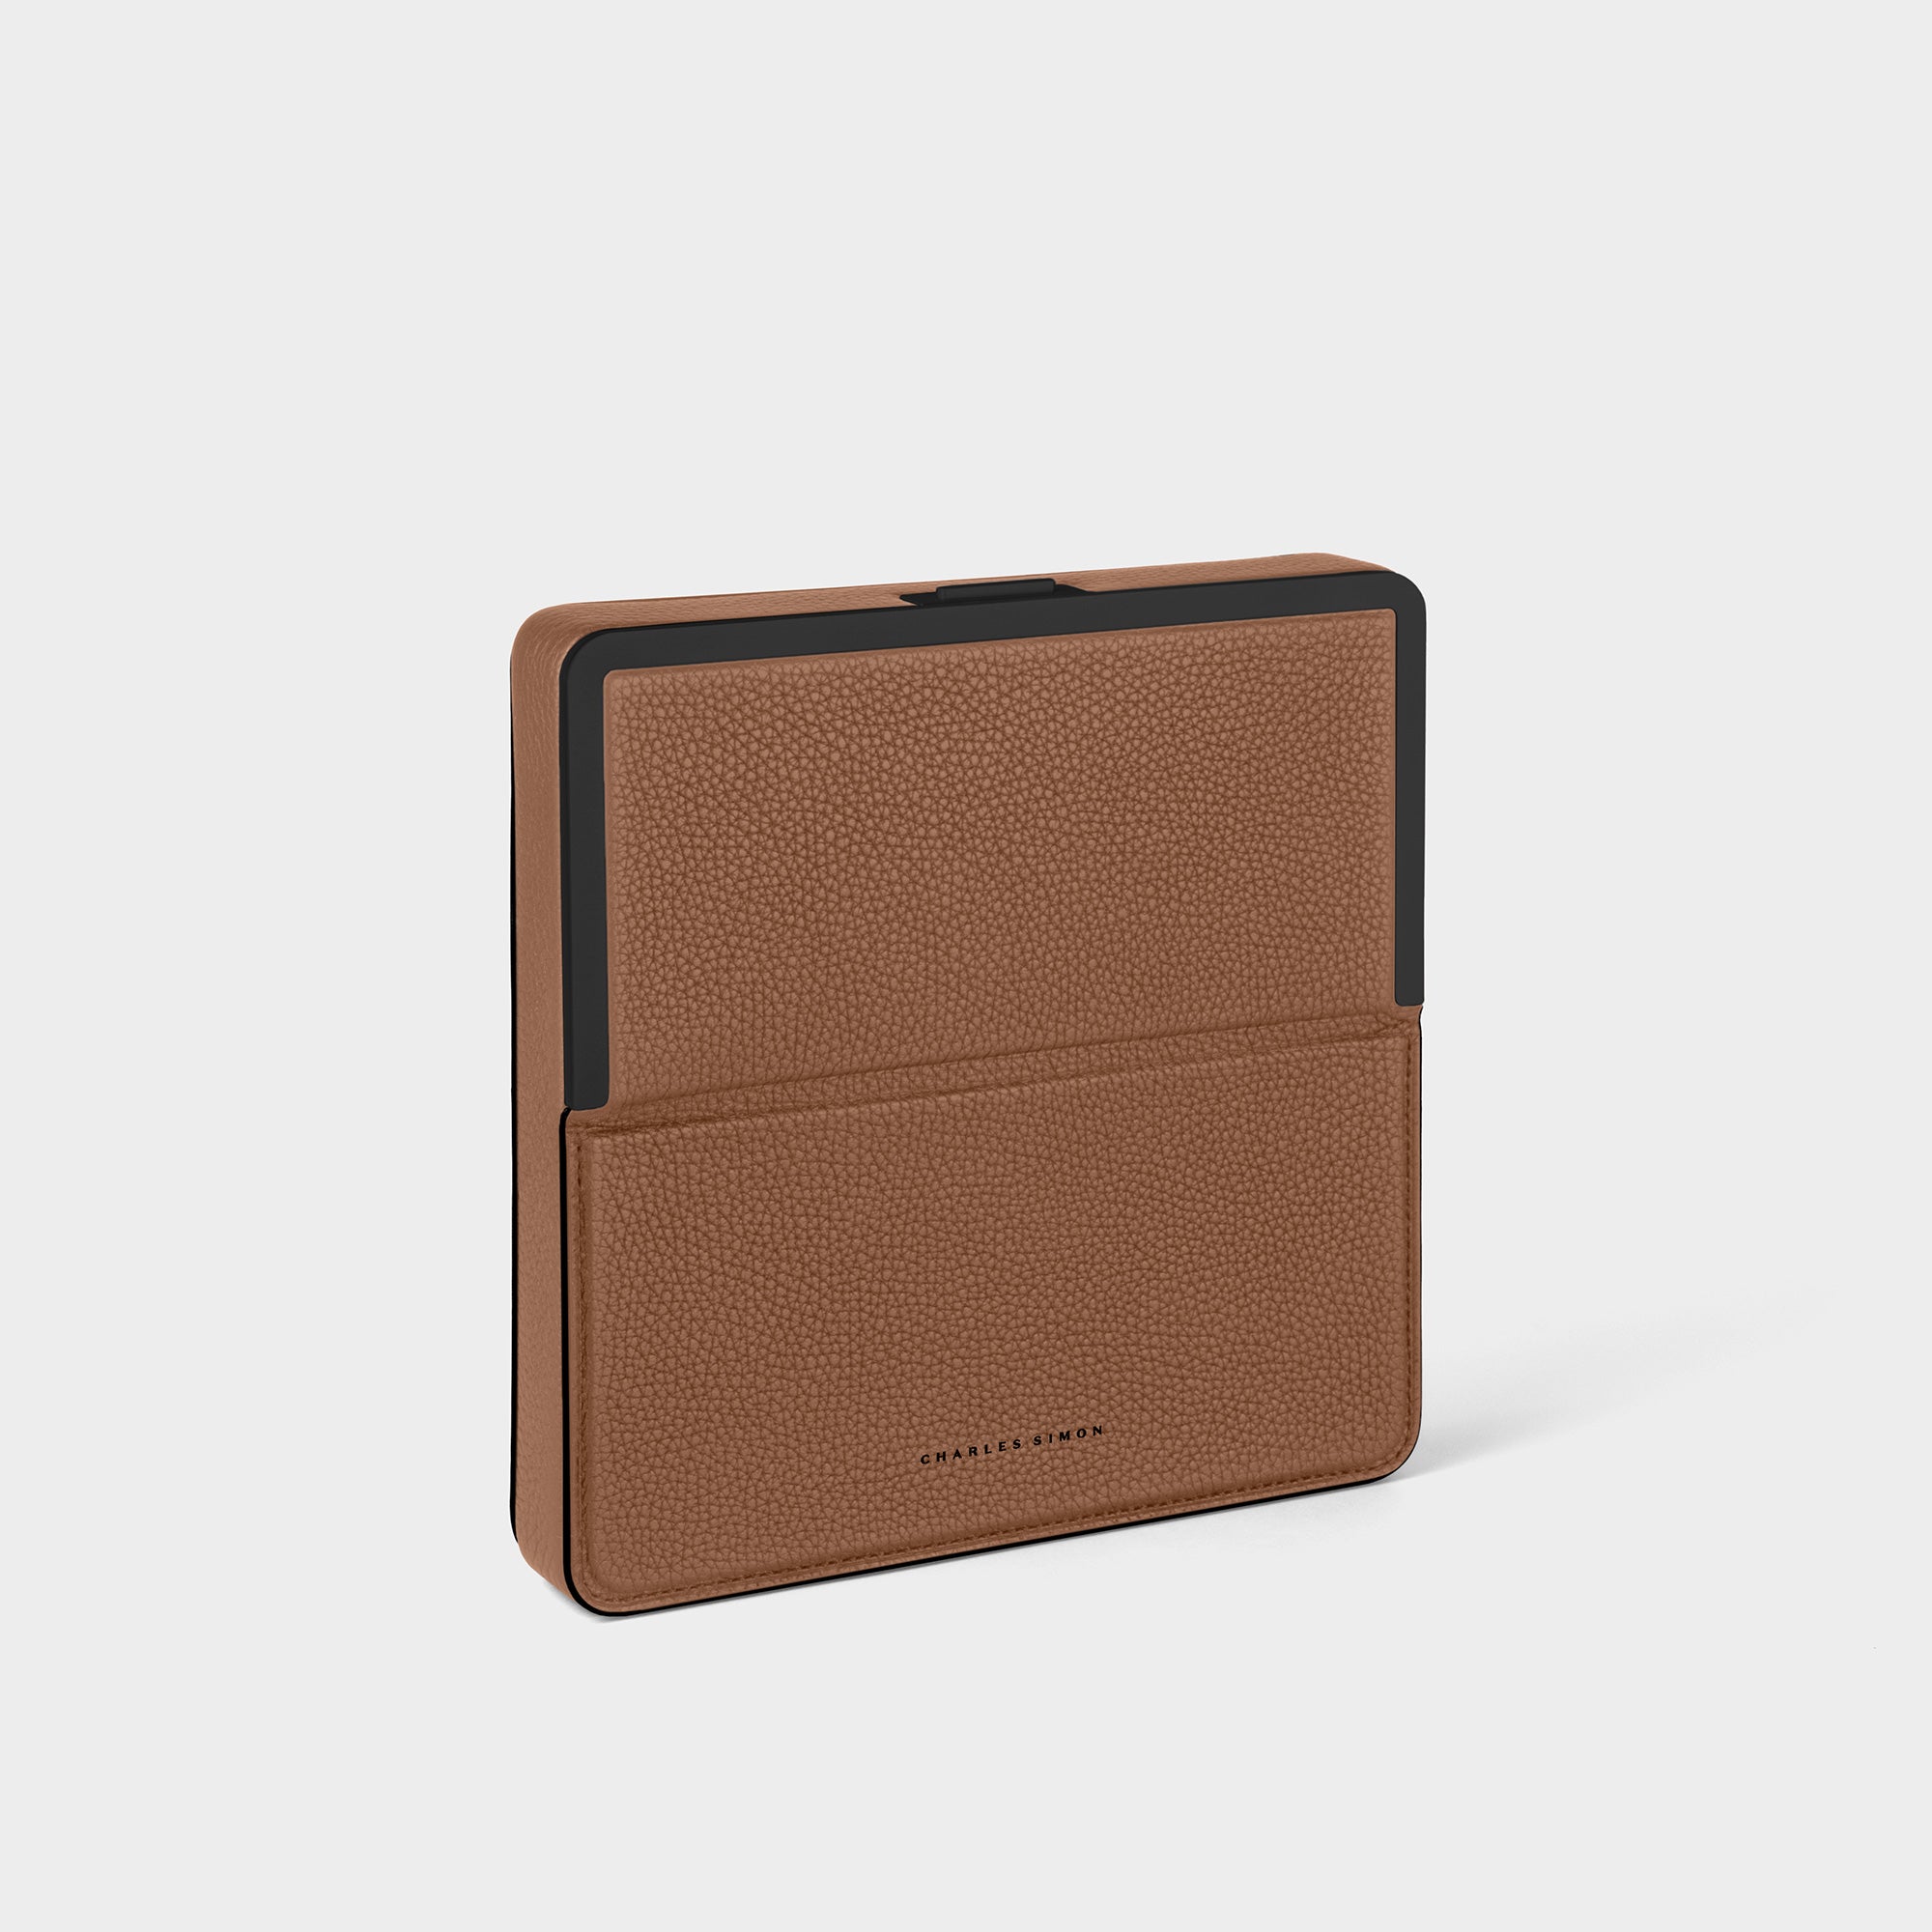 Fraser travel wallet in tan leather and black aluminum by Charles Simon